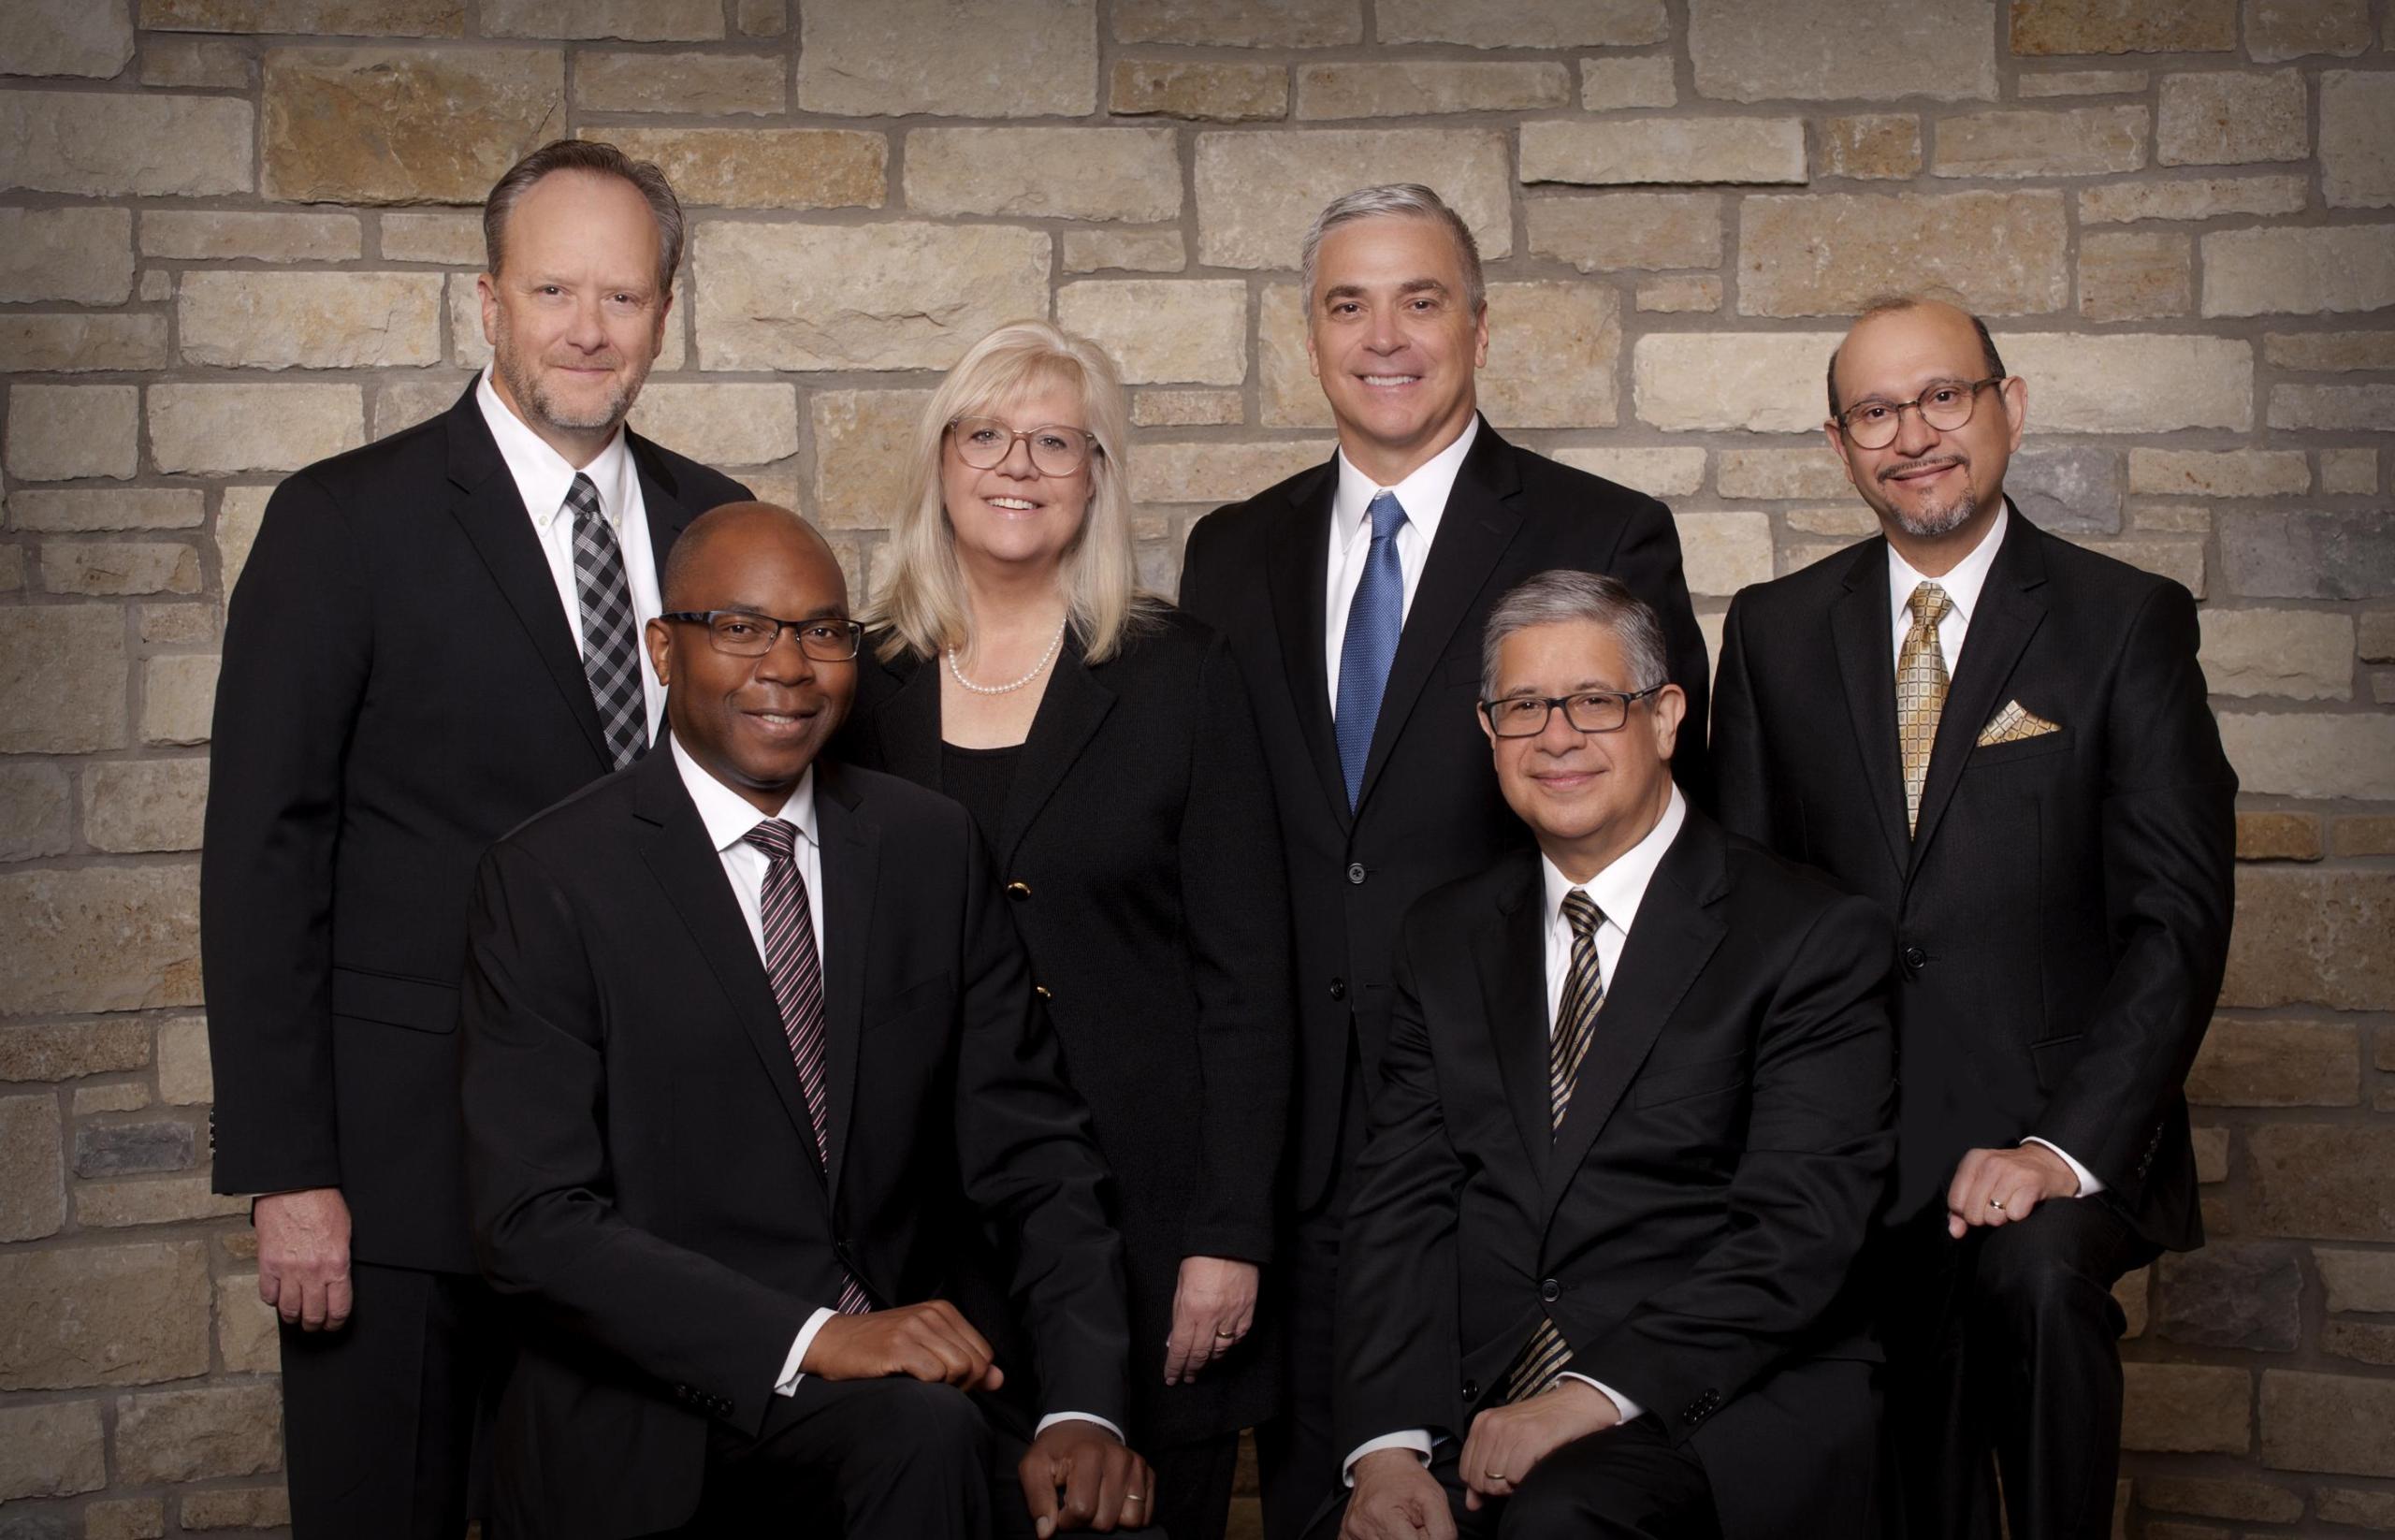 Church of the Nazarene Board of General Superintendents (BGS). Back row left to right: T. Scott Daniels, Carla Sunberg, David Music, Gustavo Crocker; Front Row left to right: Filimão Chambo, Christian Sarmiento.